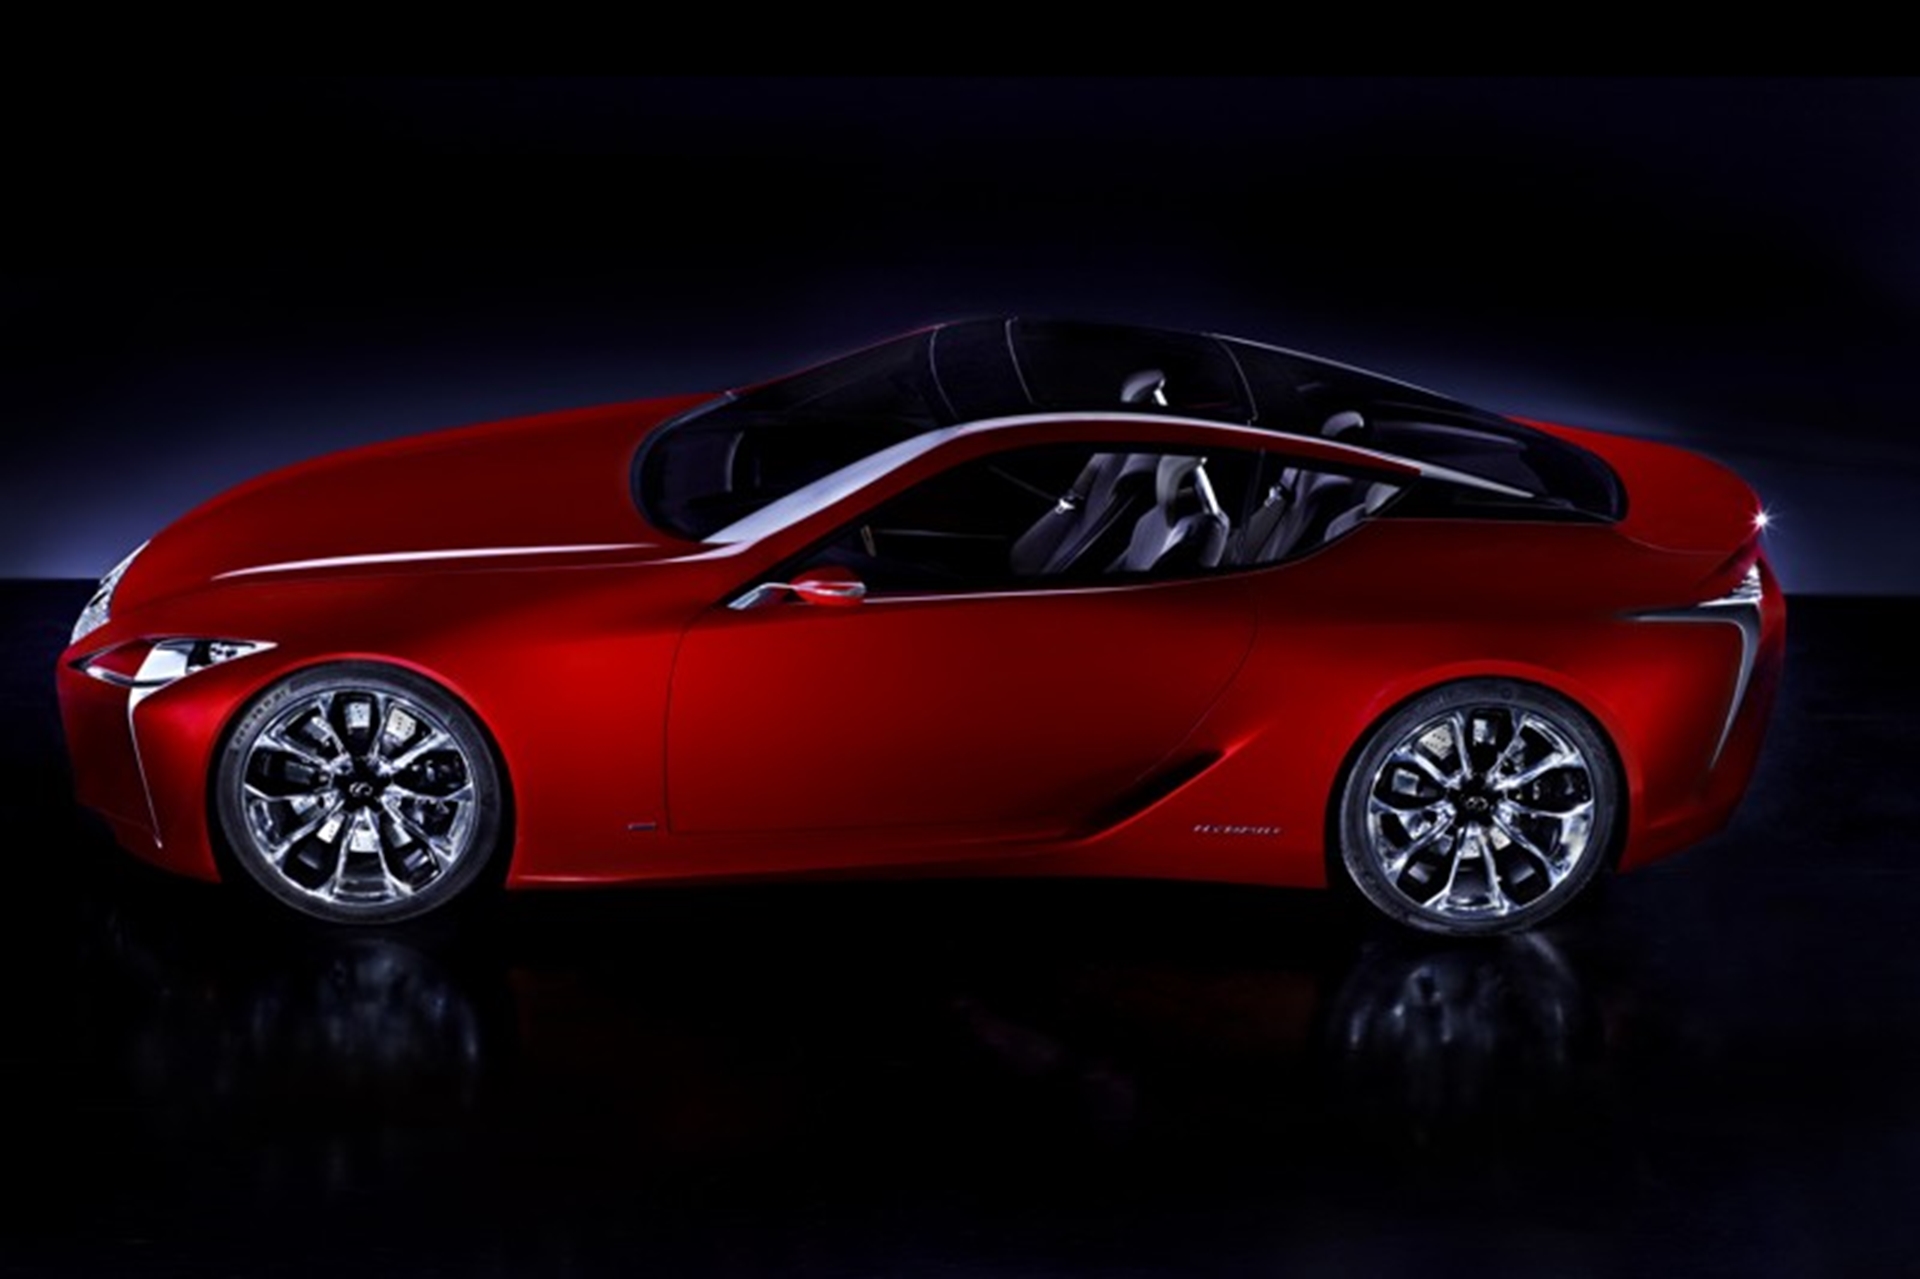 The new LF-LC 2+2 sports coupe concept